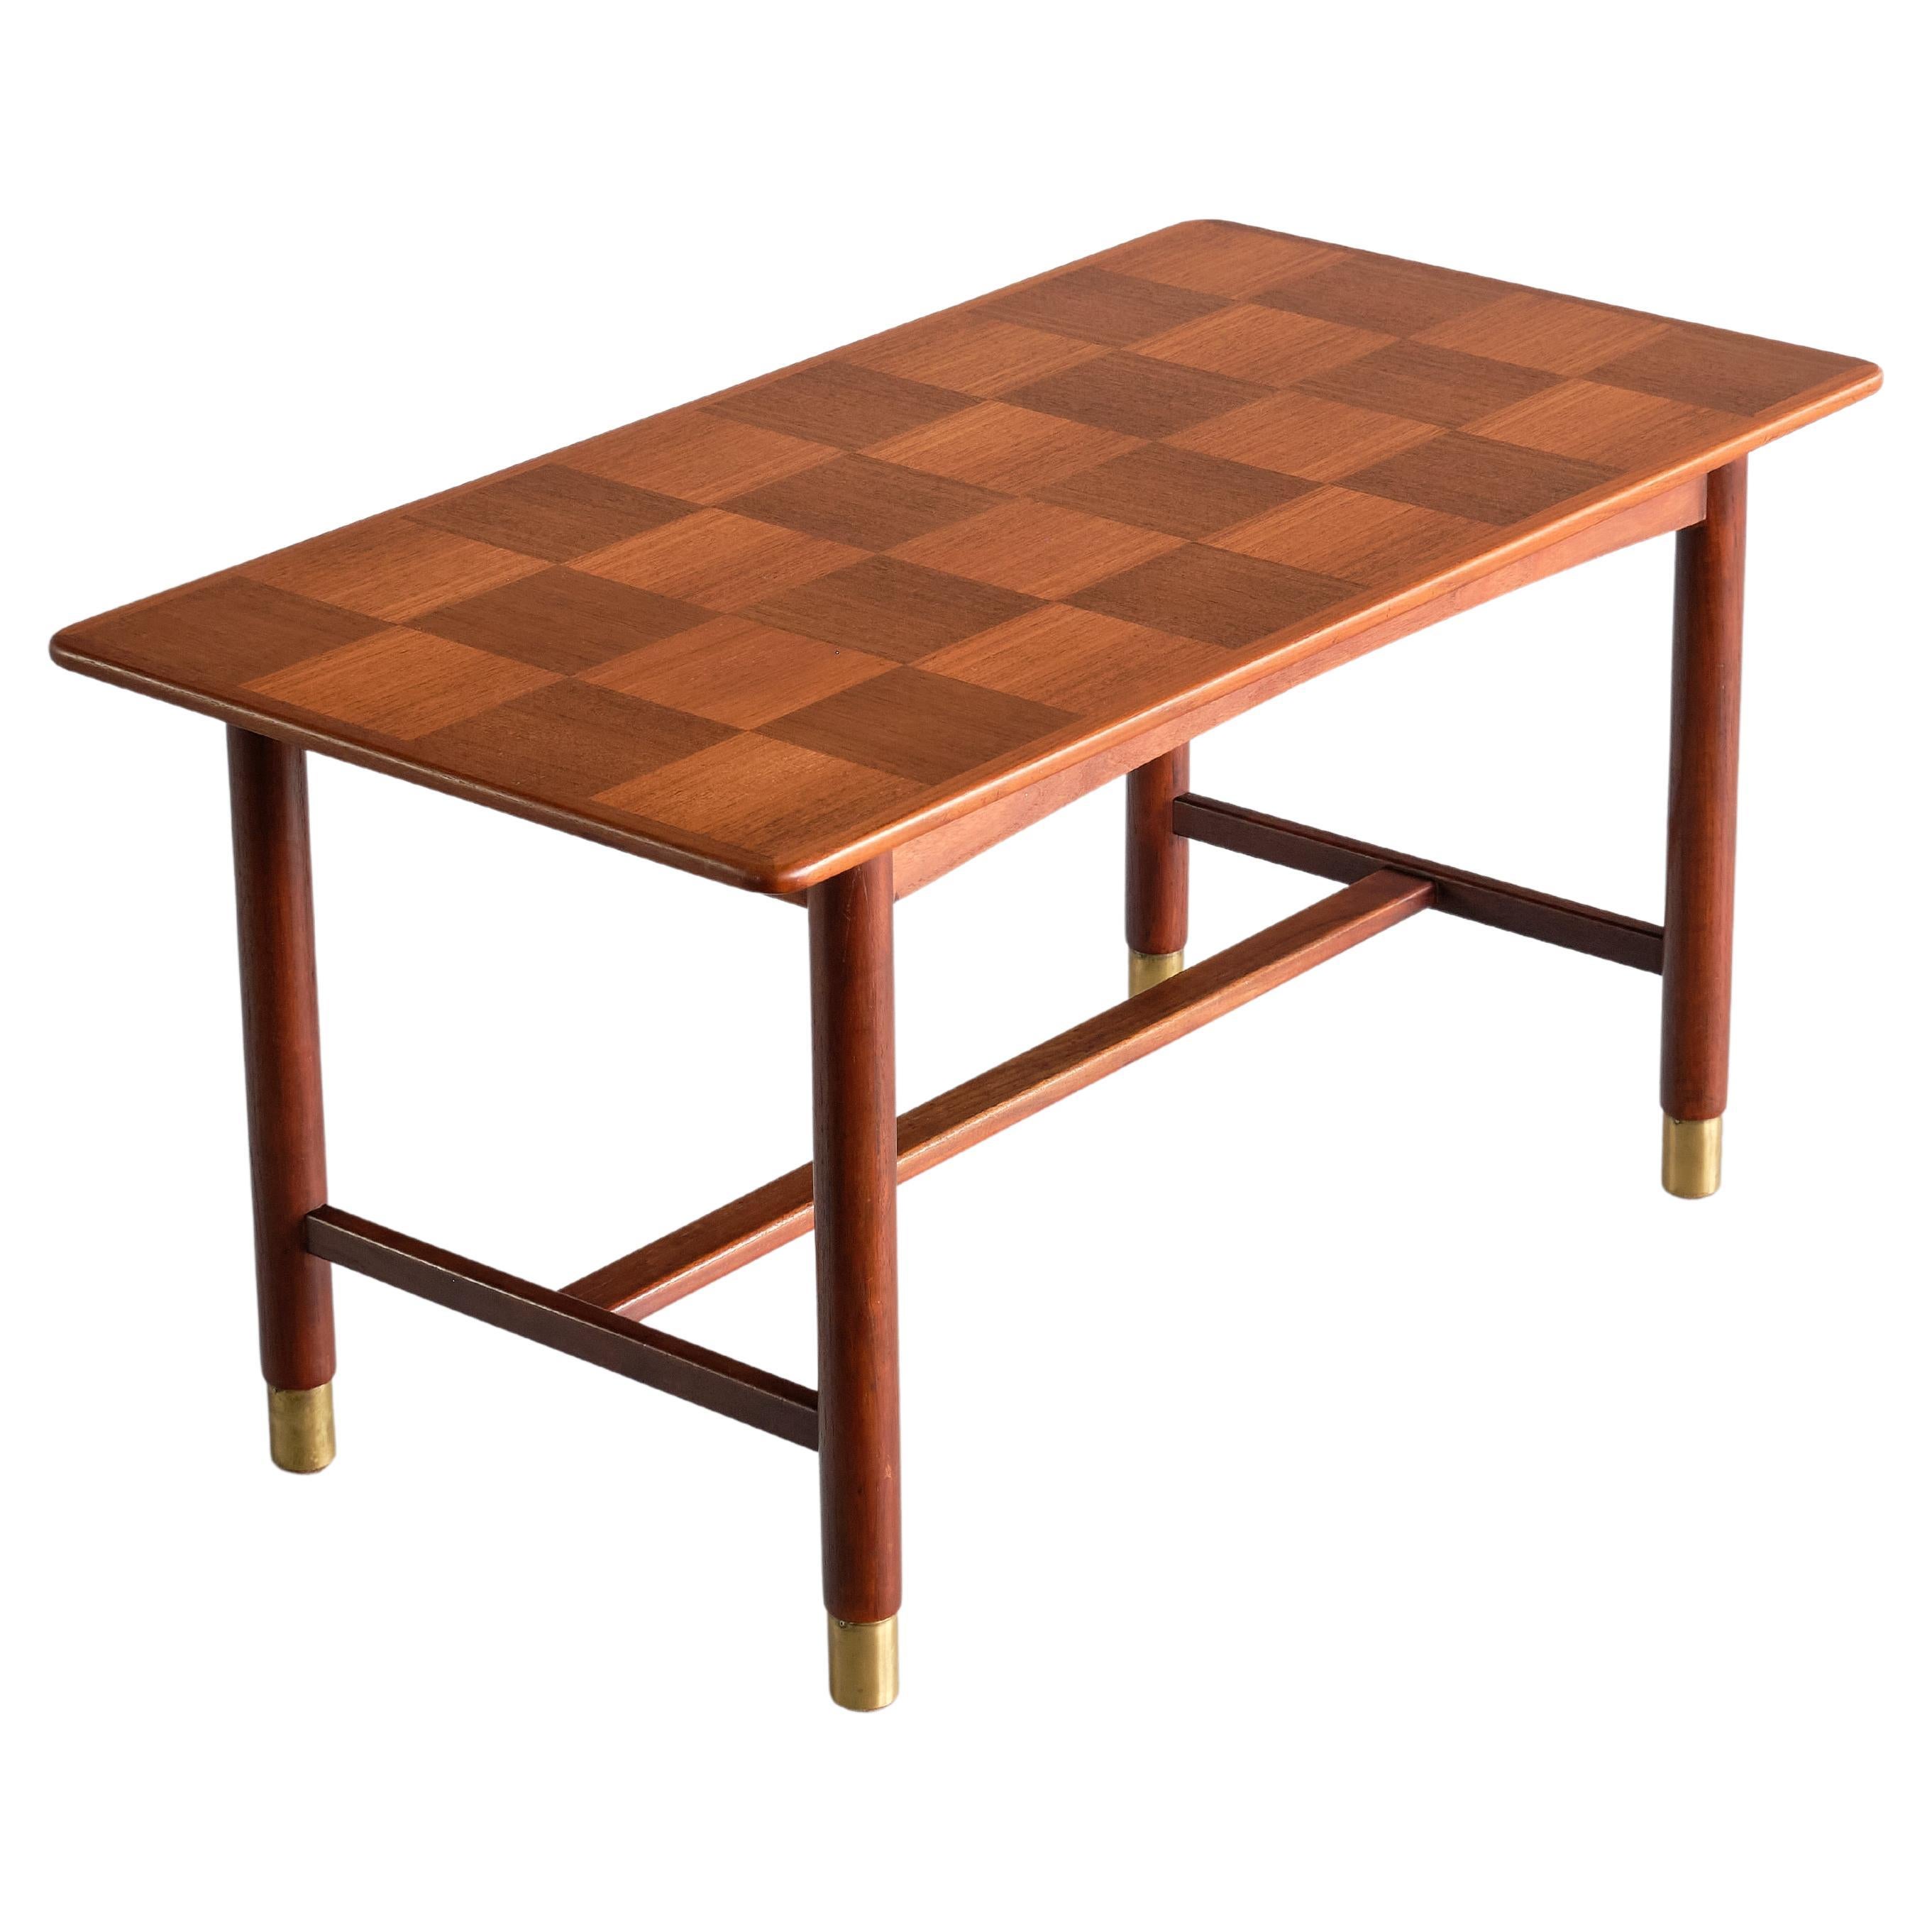 Carl Axel Acking Coffee Table in Teak and Brass, SMF Bodafors, Sweden, 1950s For Sale